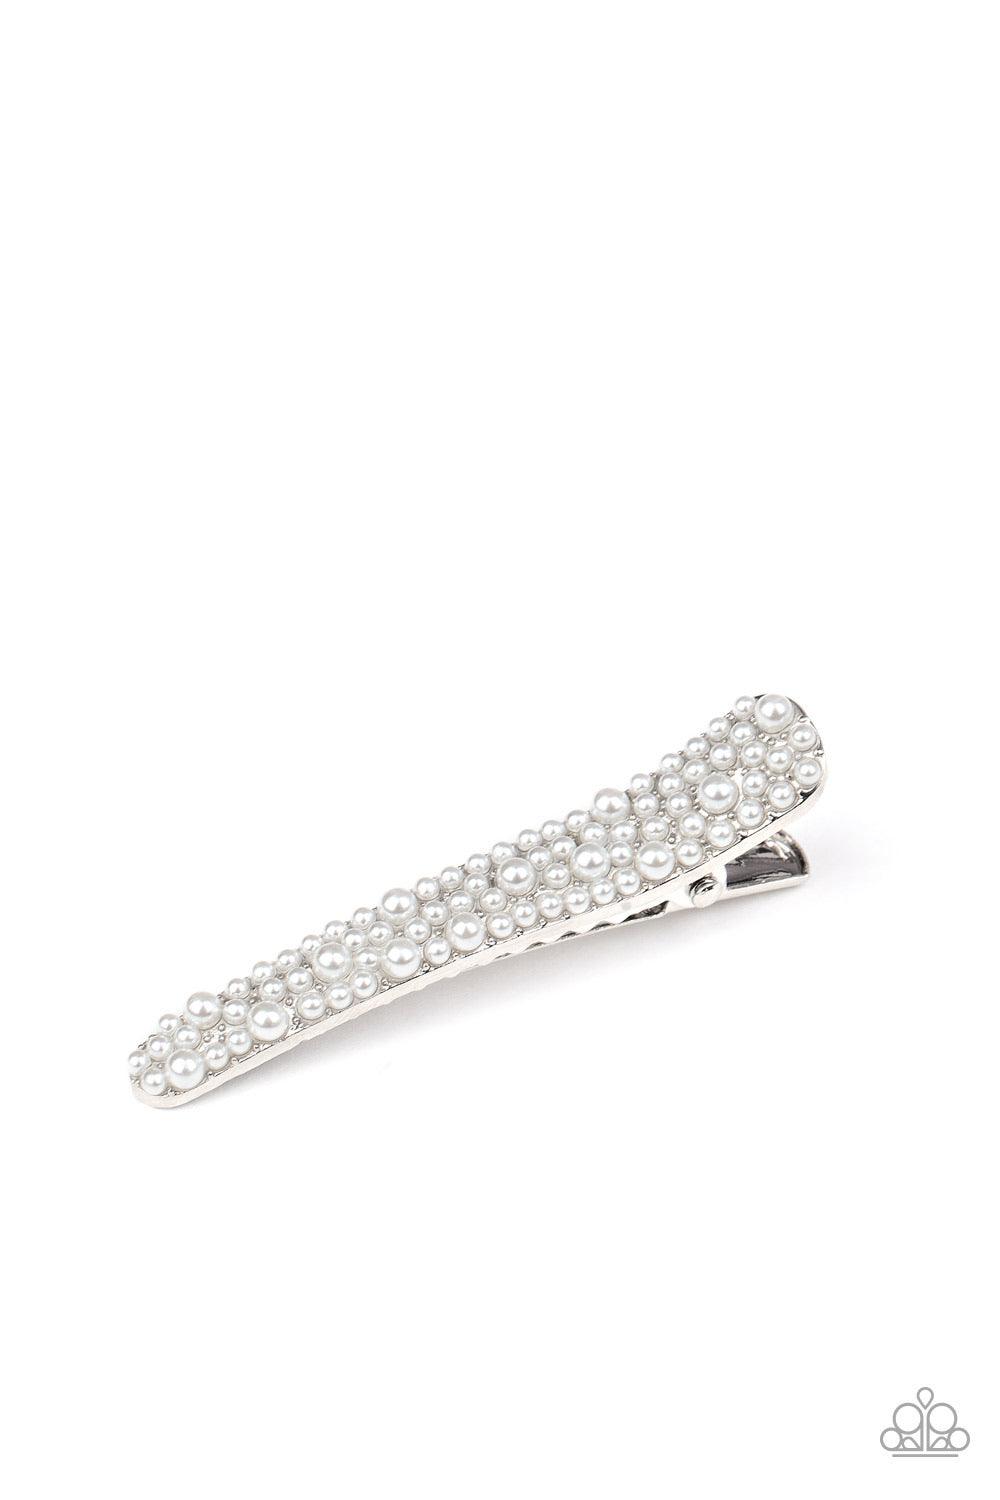 Paparazzi Accessories Wish You Were HAIR ~White Varying in size, dainty white pearls adorn the front of a glistening silver frame for a timeless look. Features a standard hair clip. Sold as one individual hair clip.